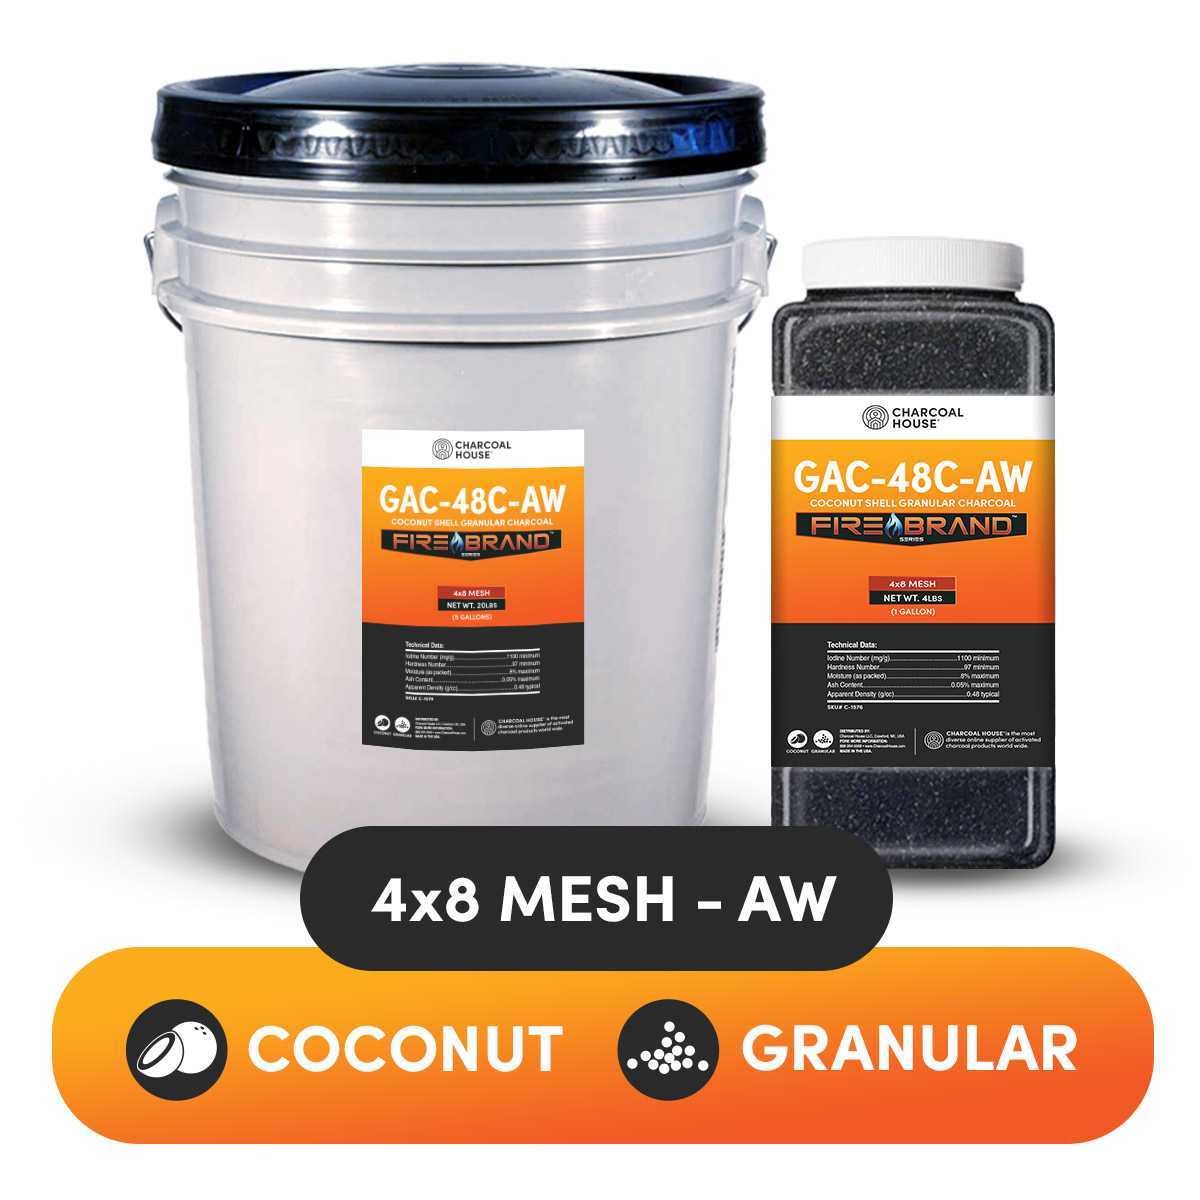 BULK Granular Activated Charcoal (4x8 mesh acid-washed) for Air